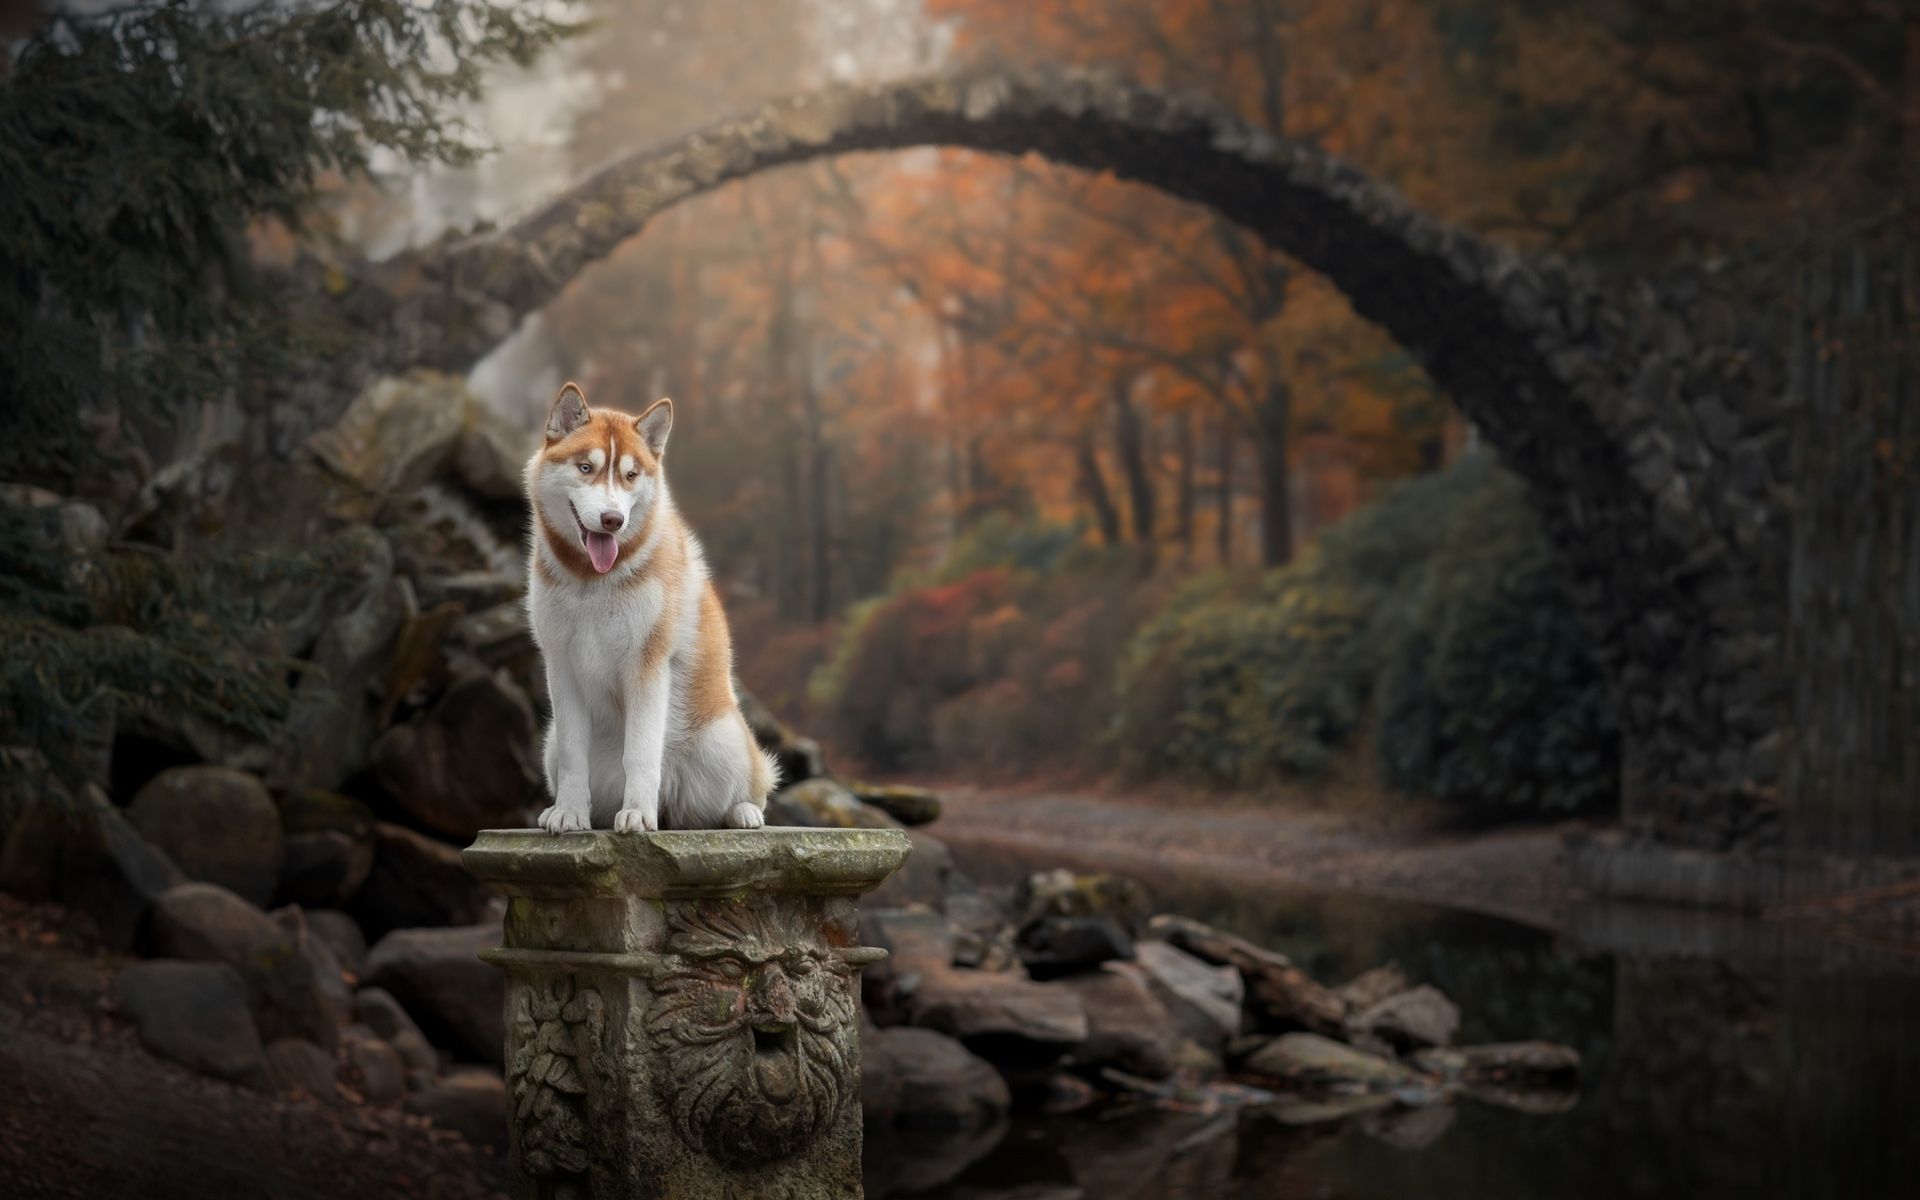 Download wallpaper Siberian Husky, autumn, brown Husky, cute animals, Husky Dog, dogs, Siberian Husky Dog, Husky for desktop with resolution 1920x1200. High Quality HD picture wallpaper